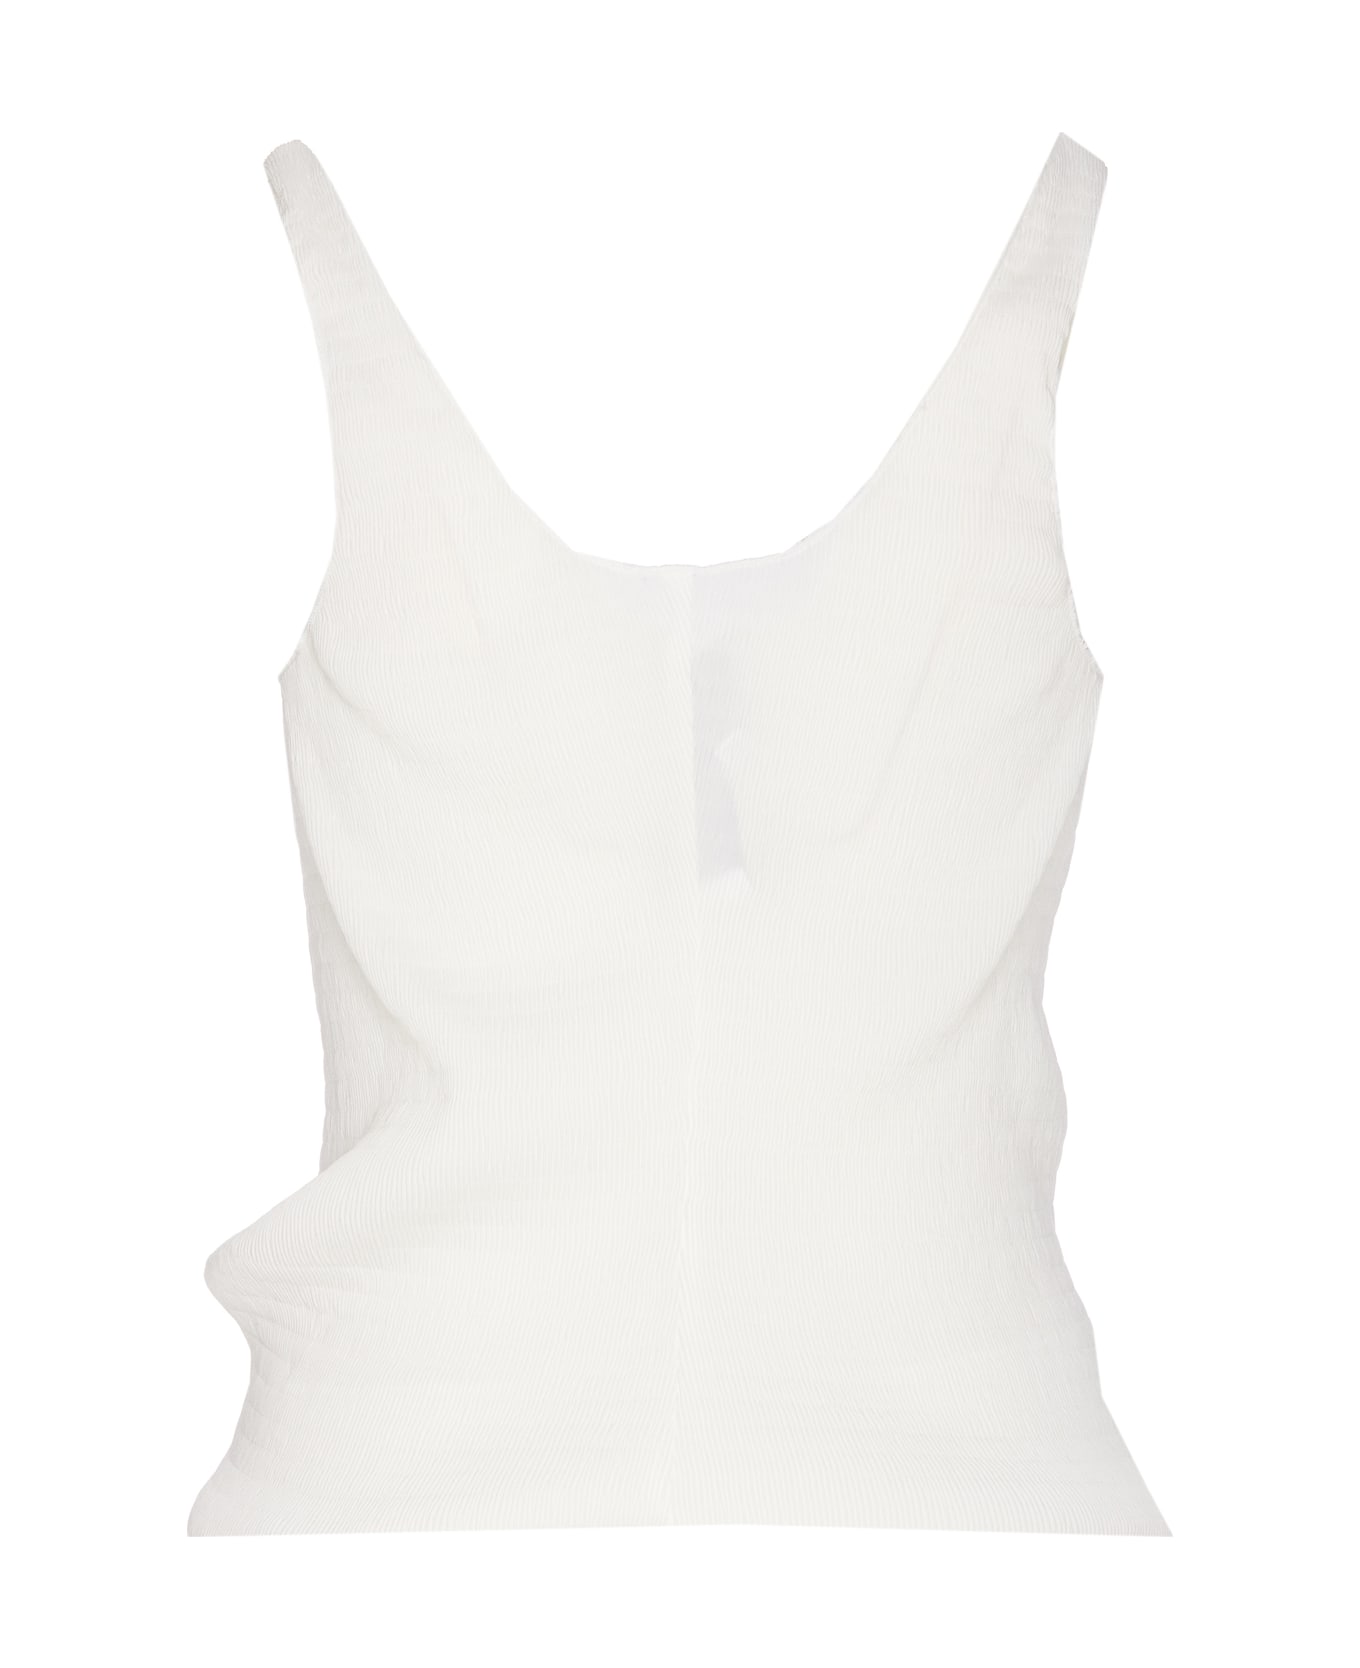 J.W. Anderson Knot Front Strap Top - WHITE